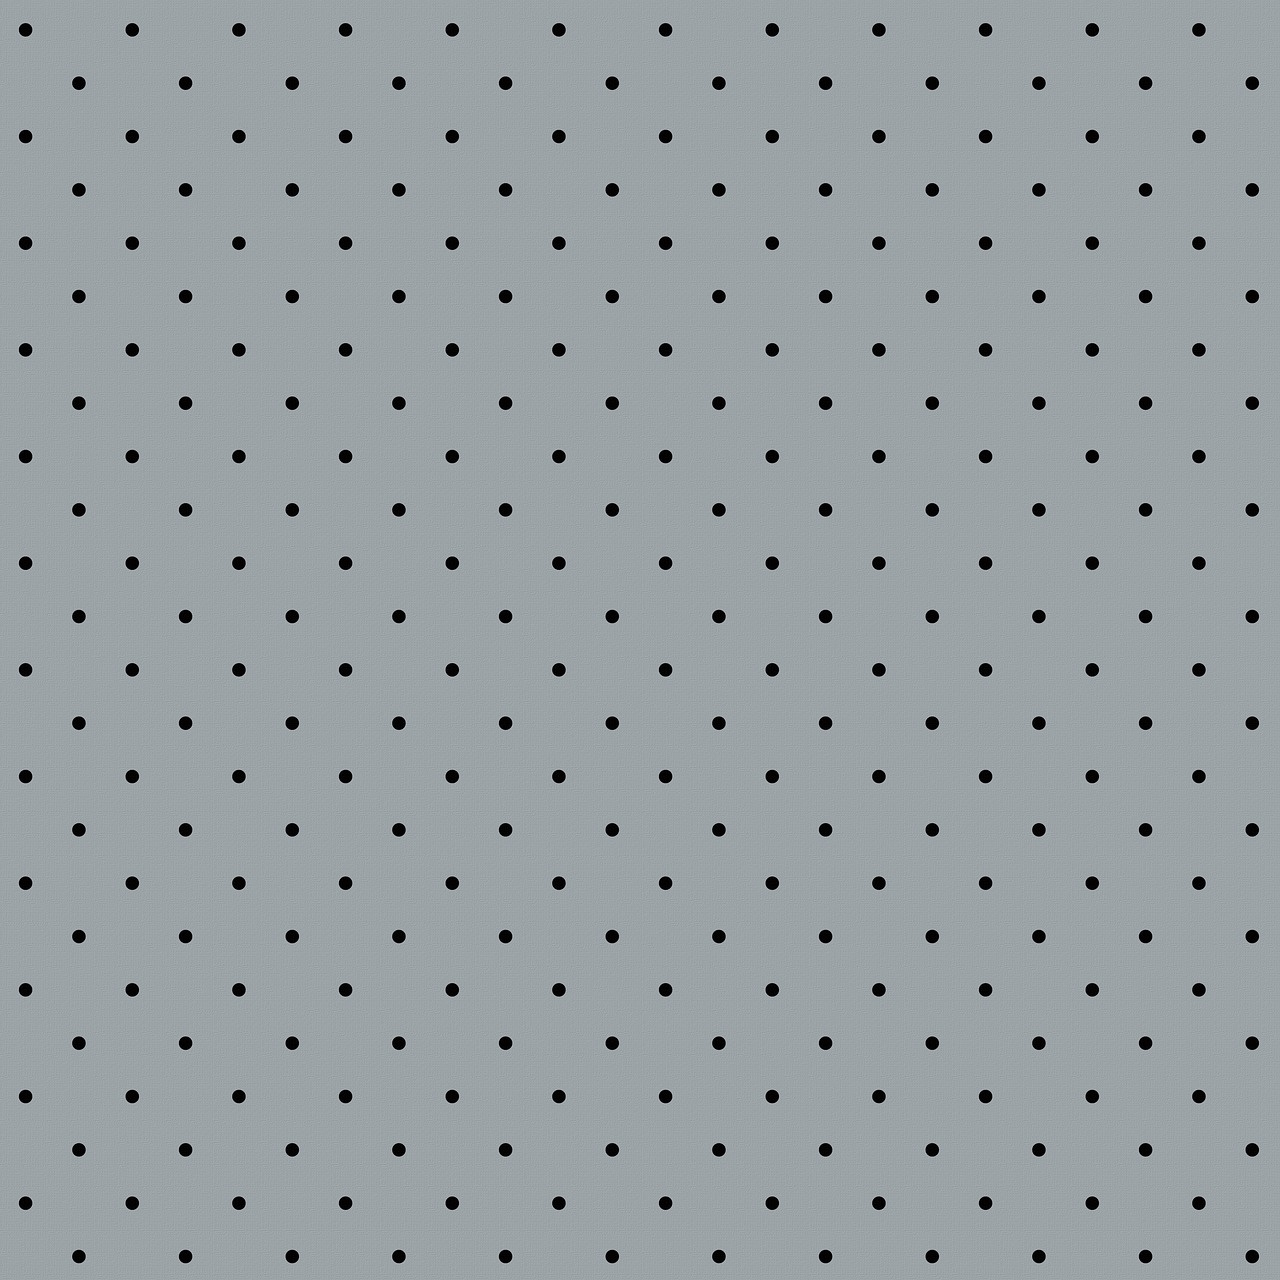 a black and white polka dot pattern on a gray background, inspired by Josse Lieferinxe, blue / grey background, minions background, perforated metal, distant photo